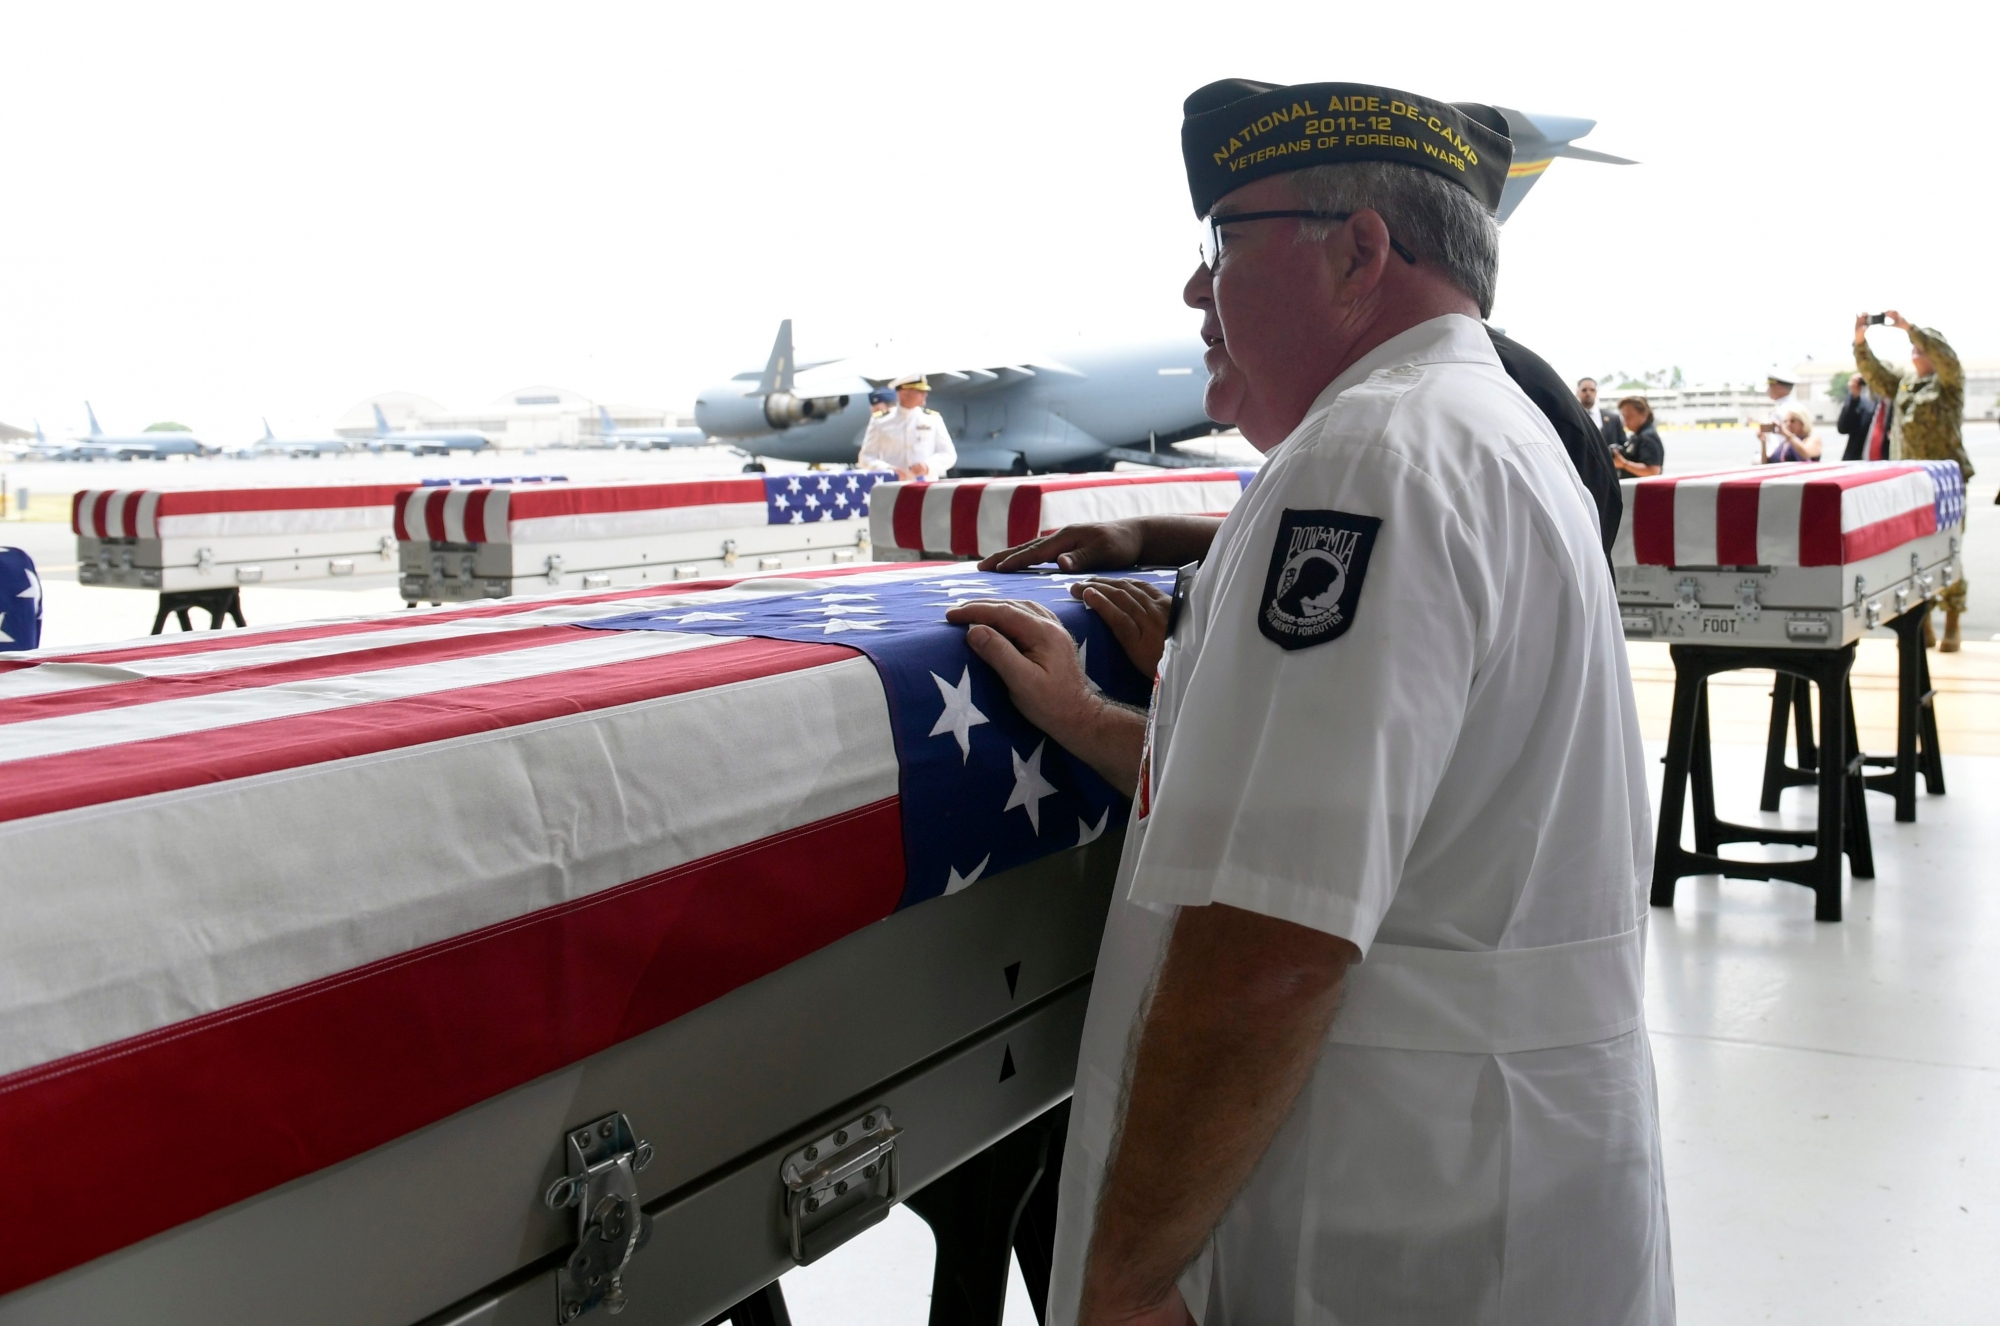 Members of the audience pause at a transfer case after at a ceremony marking the arrival of the remains believed to be of American service members who fell in the Korean War at Joint Base Pearl Harbor-Hickam in Hawaii, Wednesday, Aug. 1, 2018. North Korea handed over the remains last week. (AP Photo/Susan Walsh) US Korea War Remains